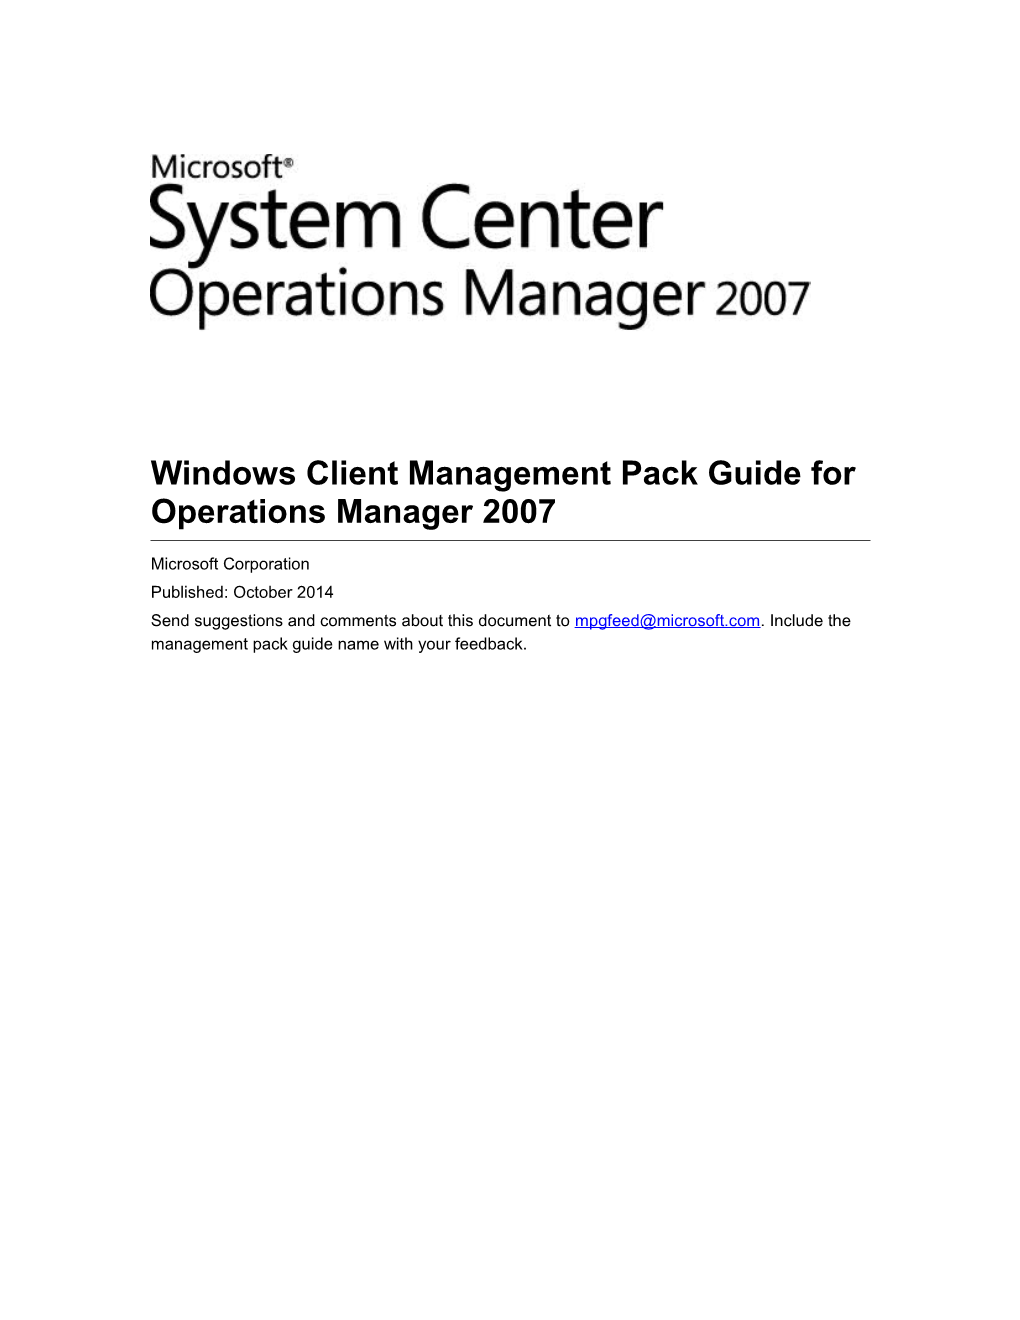 Windows Client Management Pack Guide for Operations Manager2007